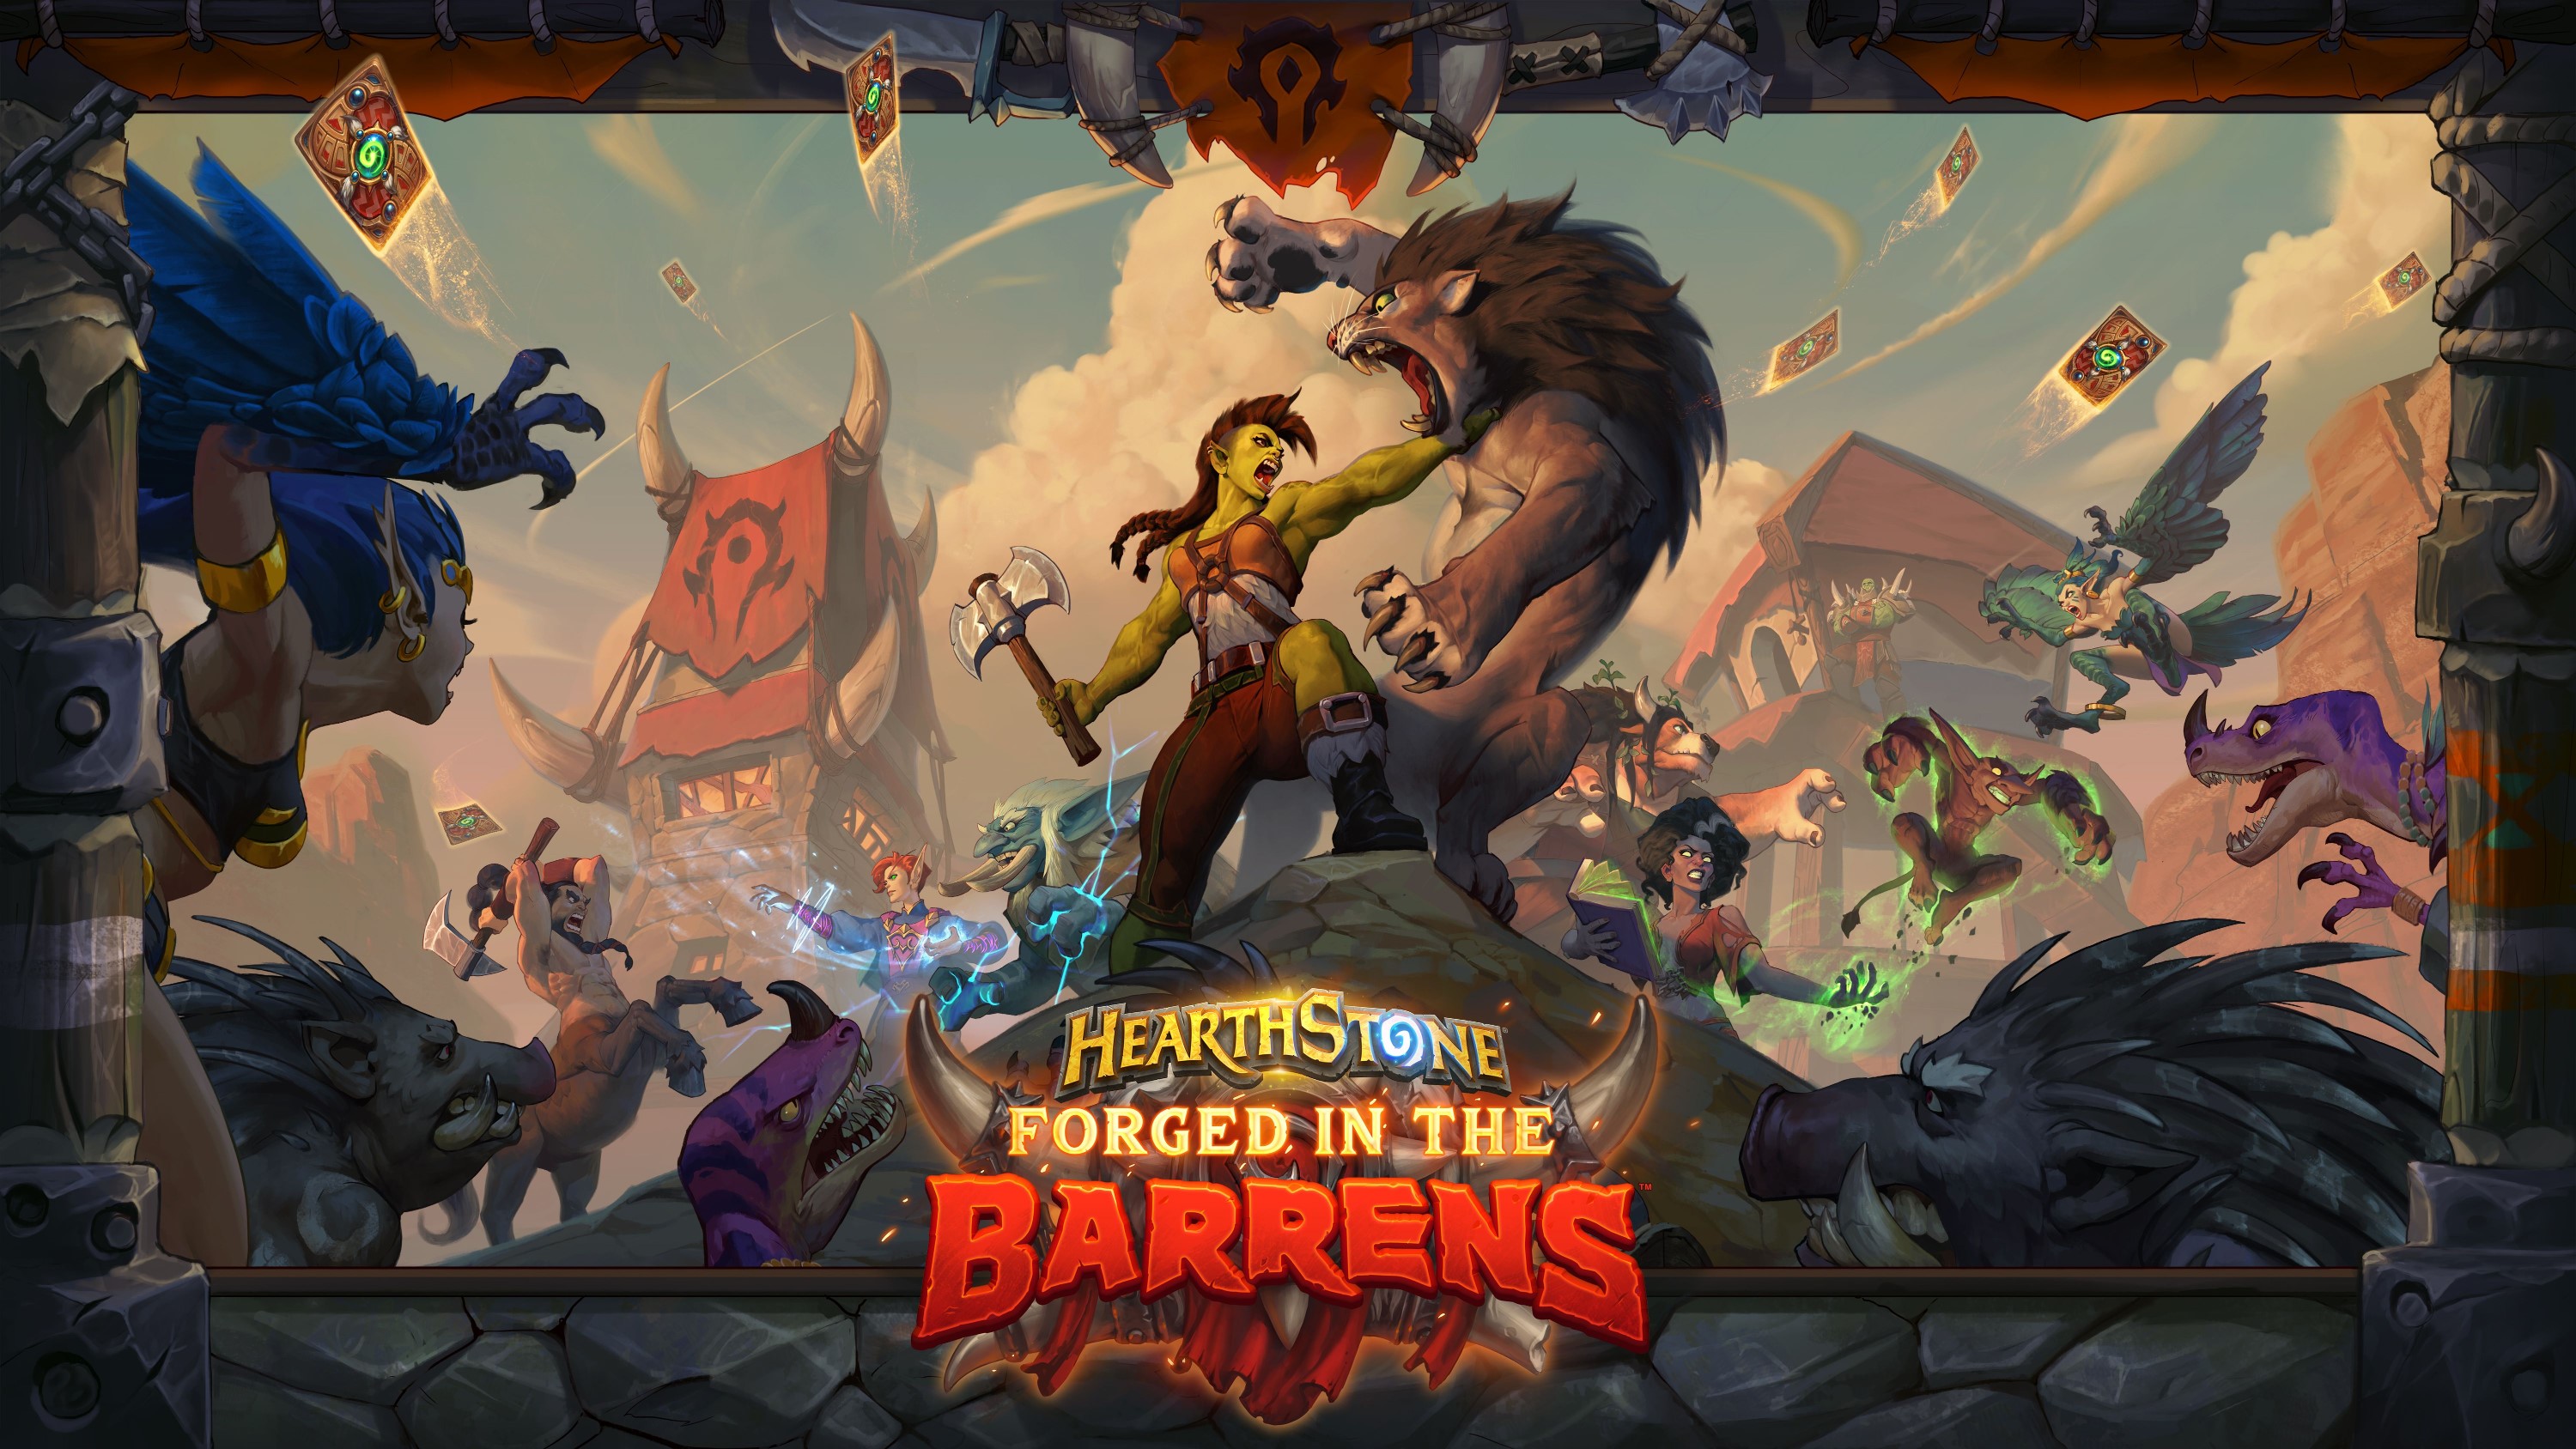 HS_Forged_in_the_Barrens_art